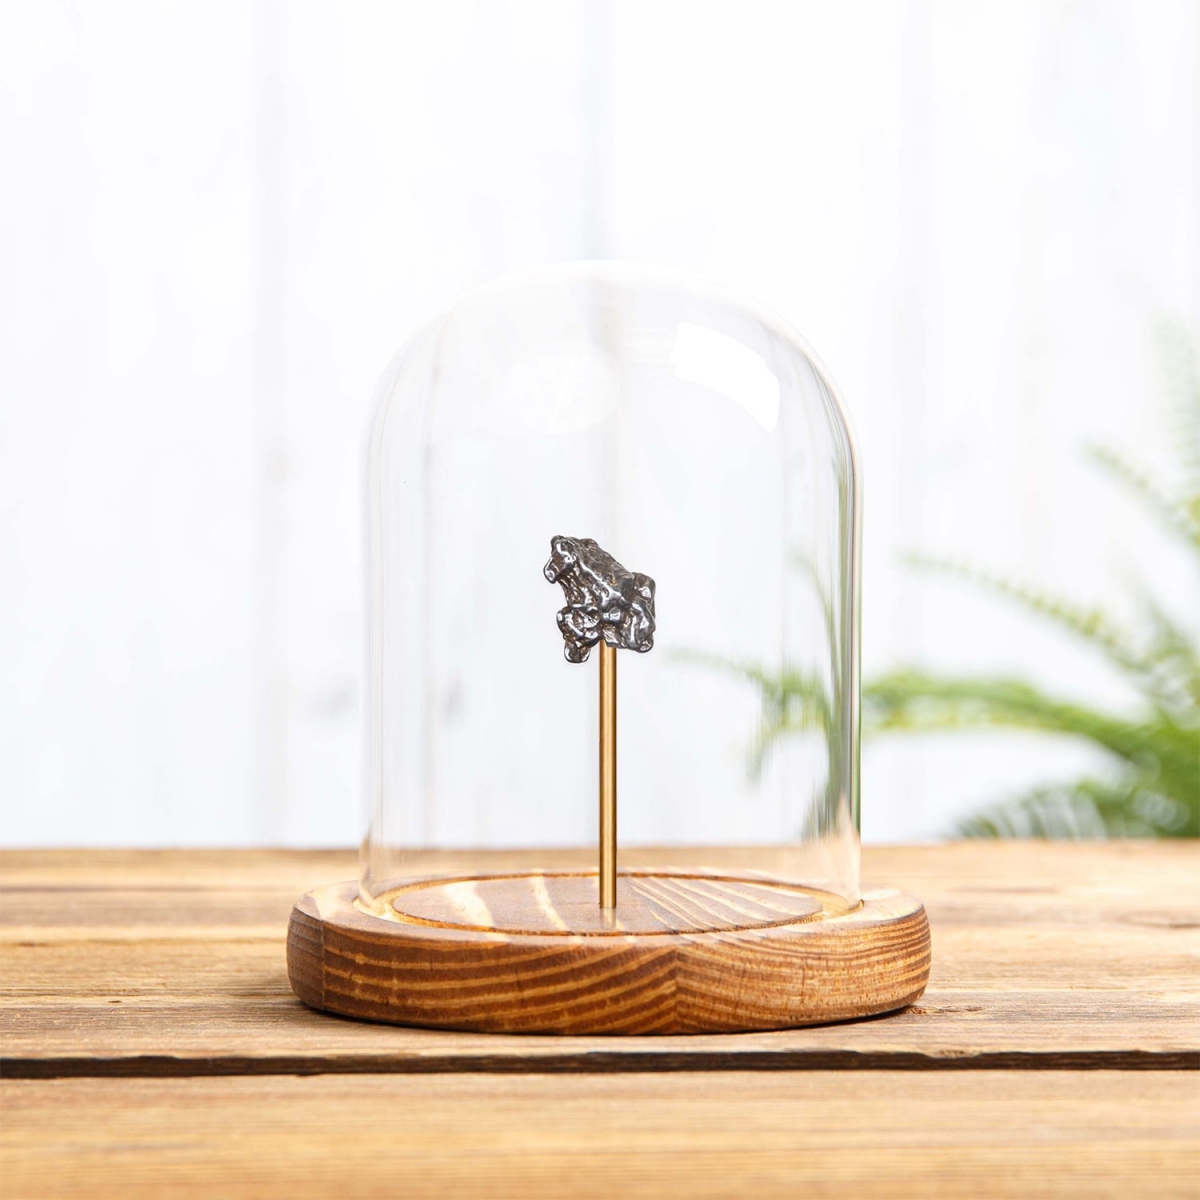 Small Campo del Cielo Meteorite in Glass Dome with Wooden base